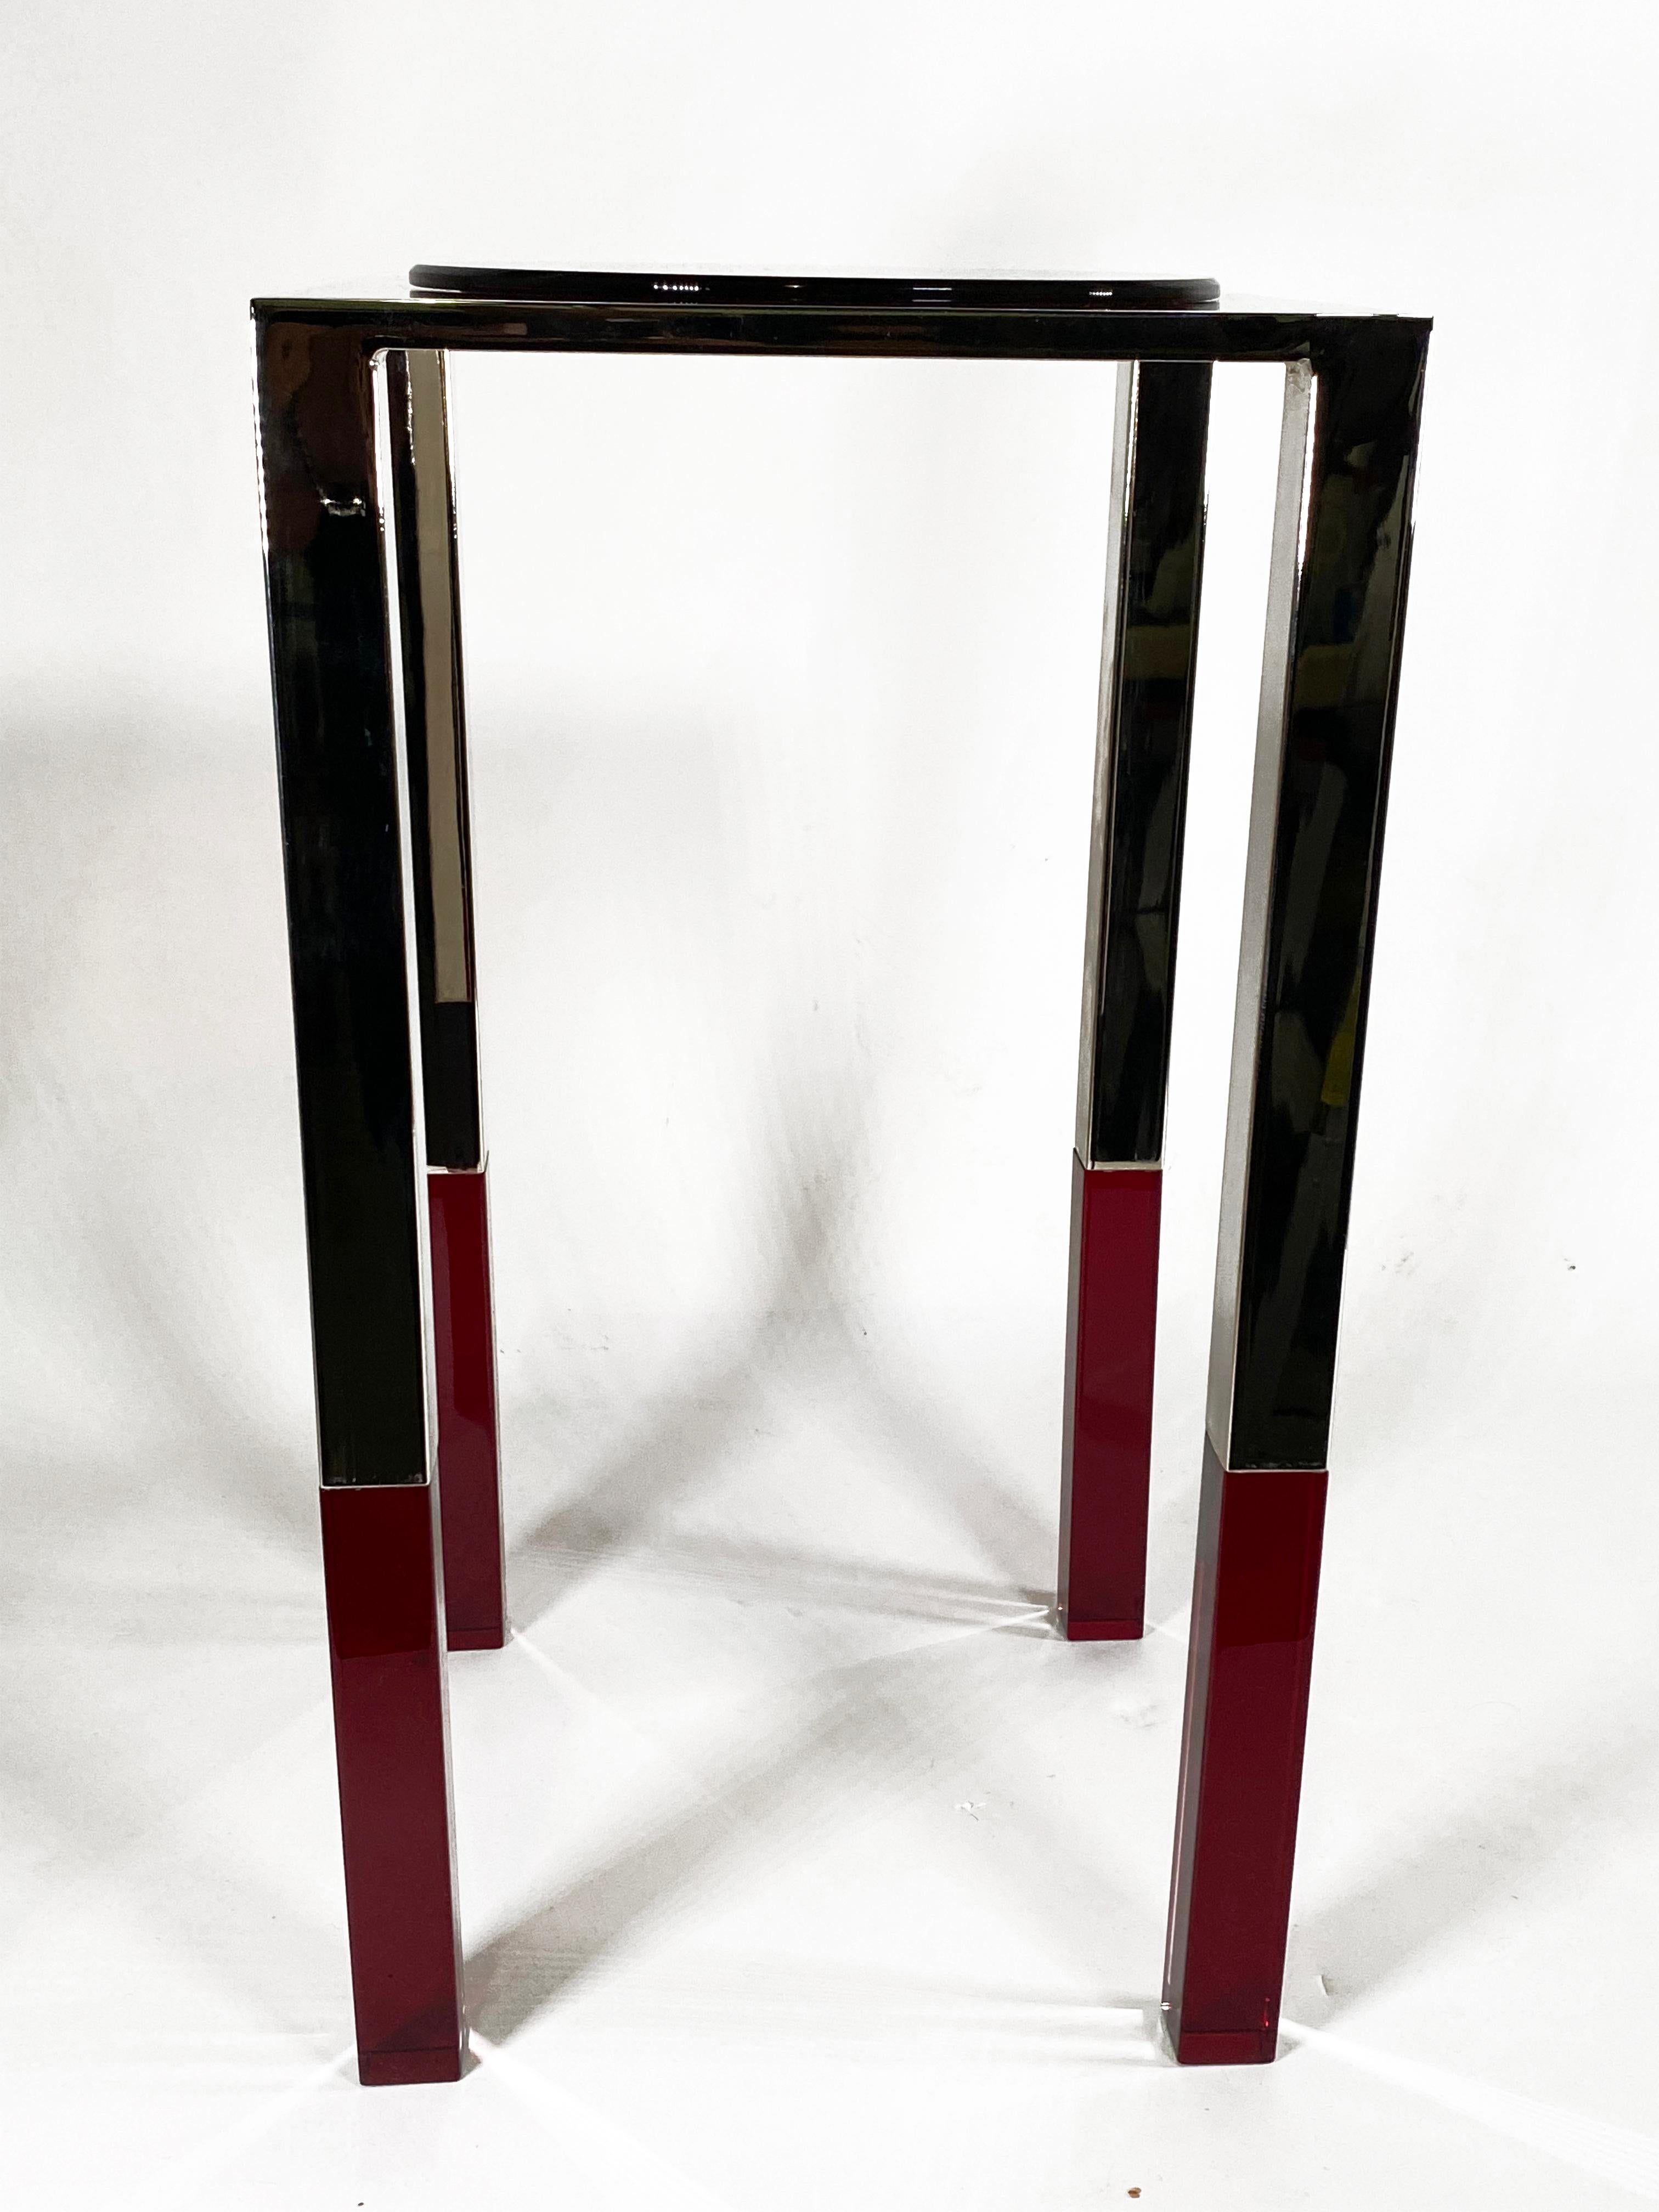 Unique side table design by Charles Hollis Jones .
Finished in polish chrome with a decorative lucite circle top plate in Red. This table is a limited edition and will only have 12 produced. We are exclusively selling this table for Charles Hollis